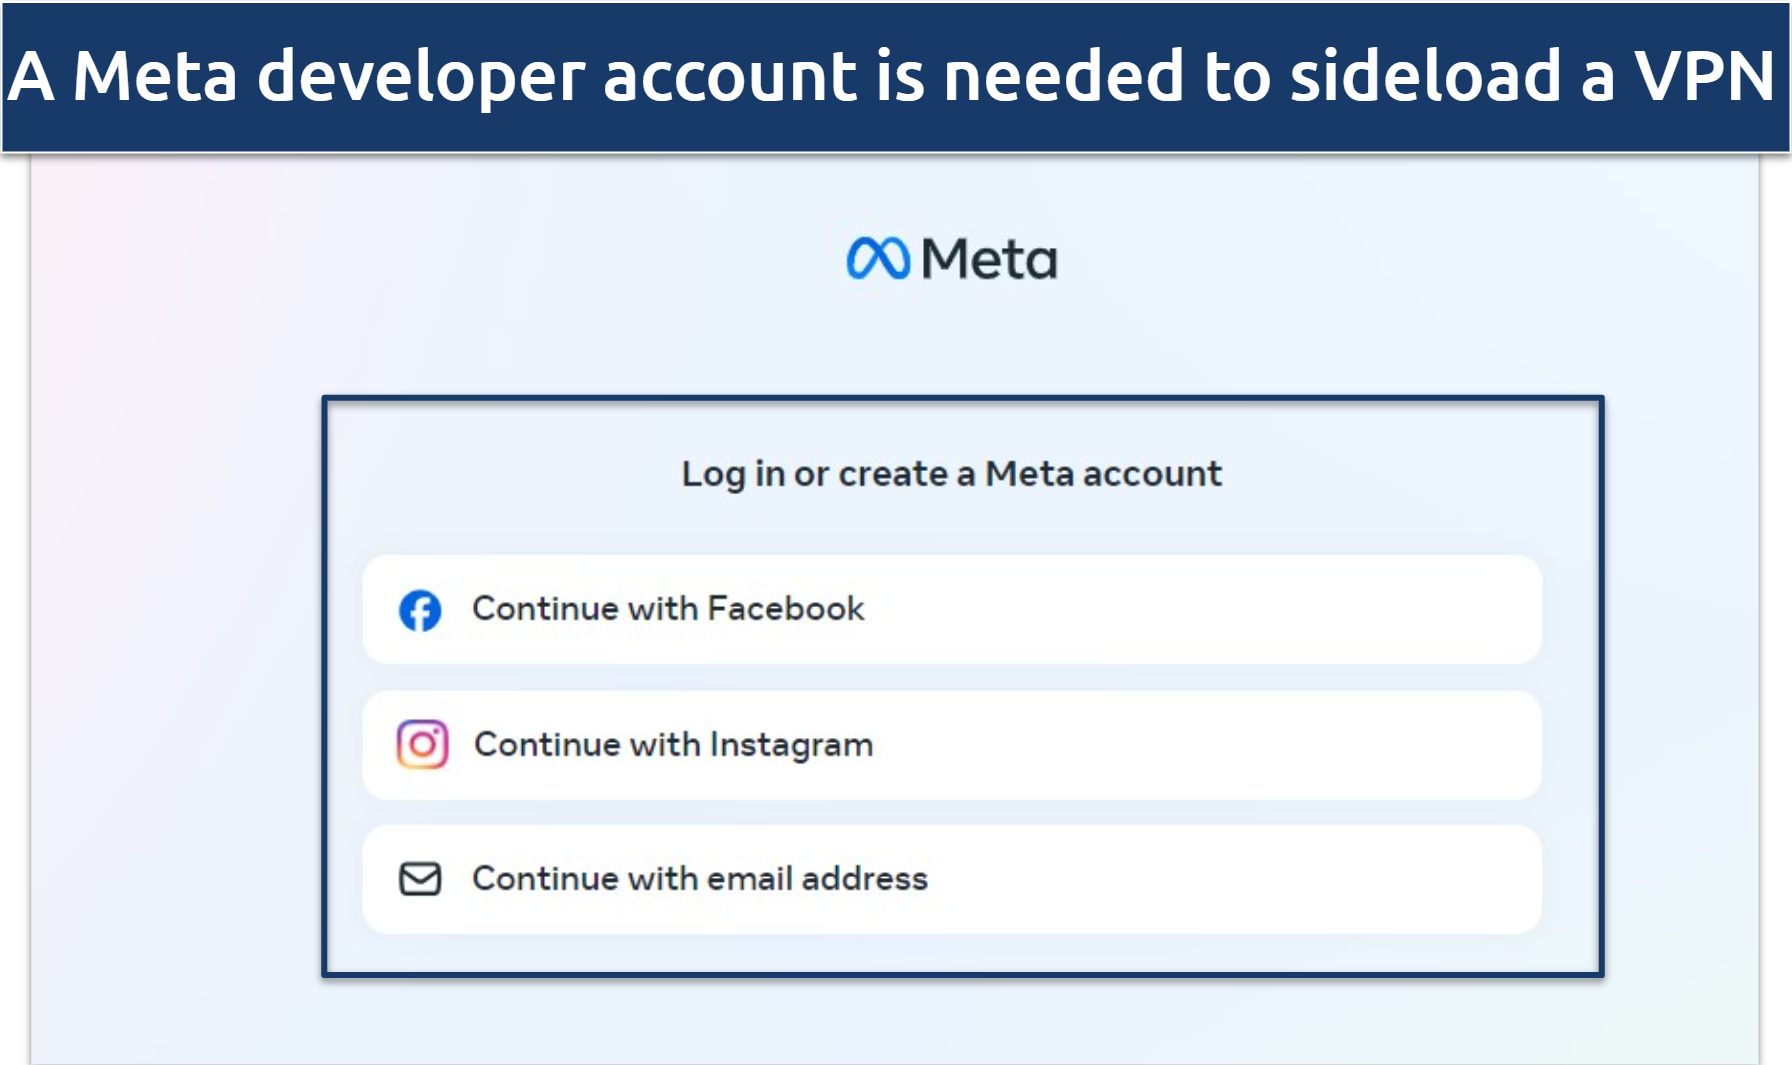 A screenshot of the Meta developer account sign up page